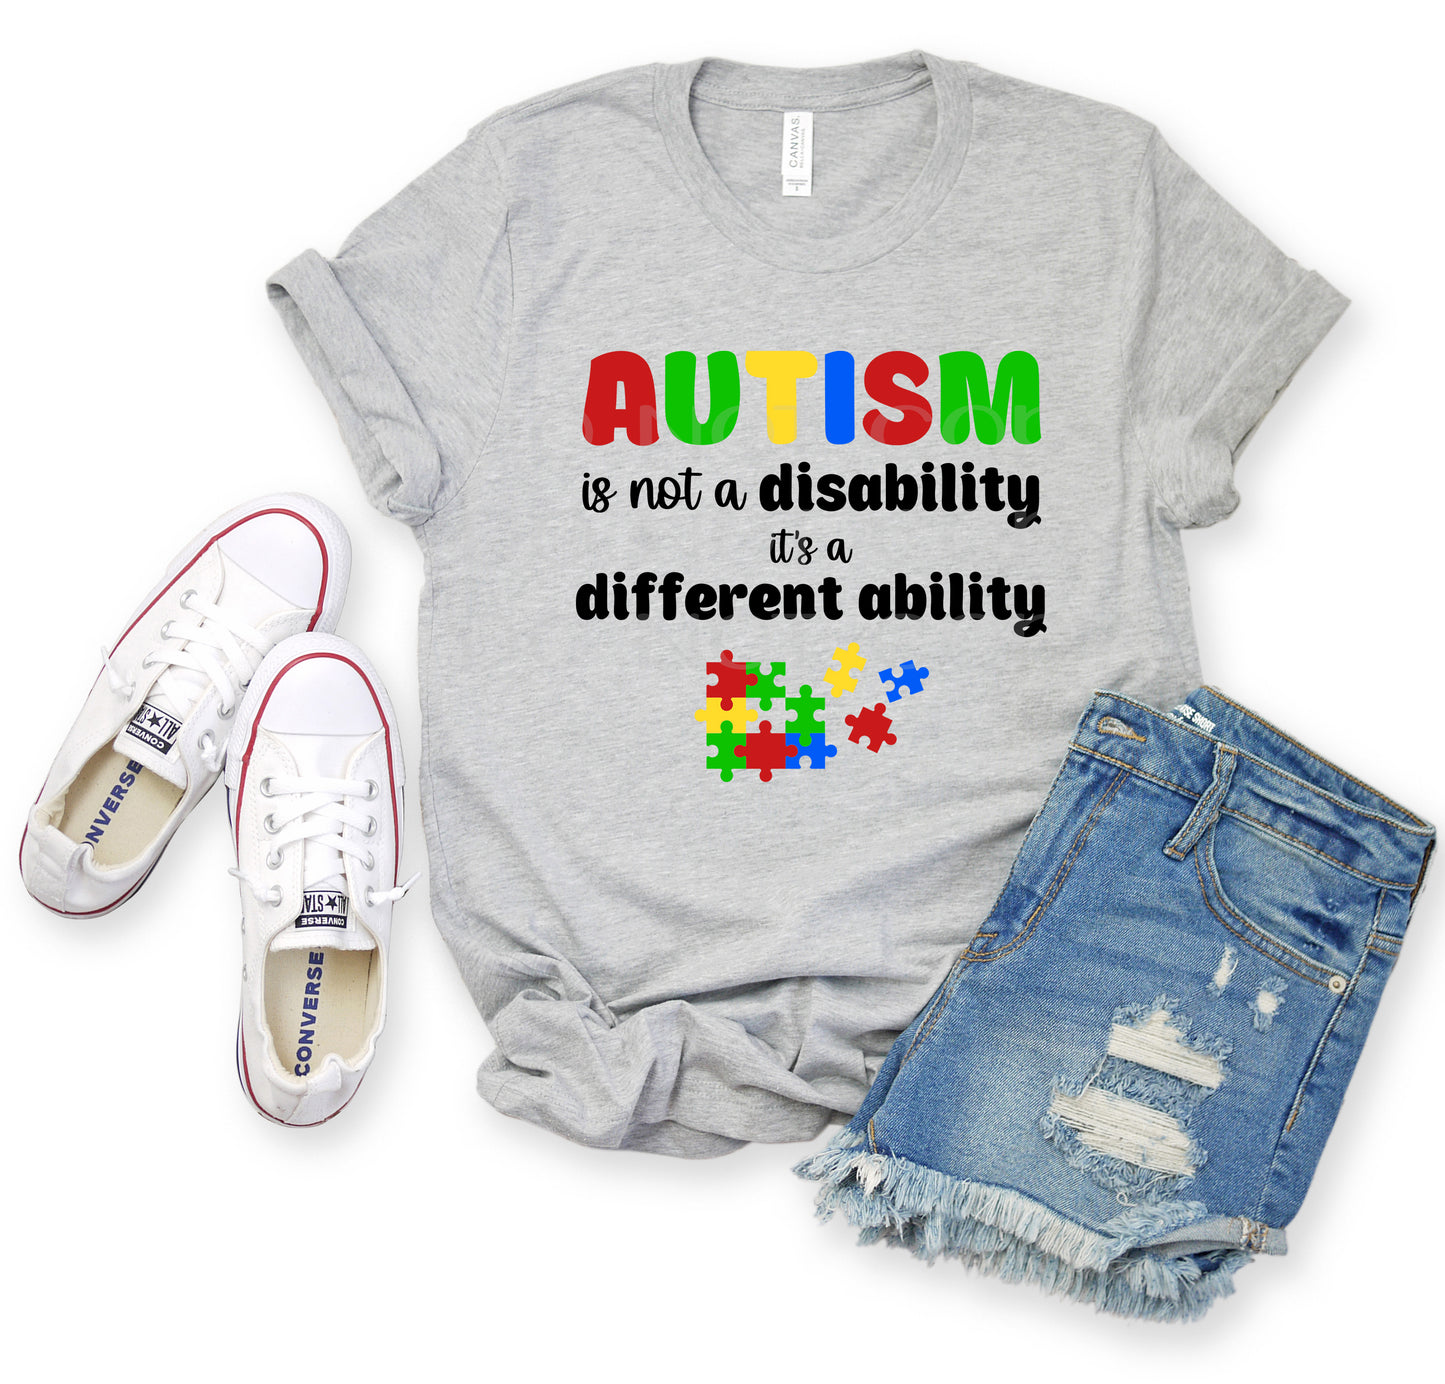 Autism is not a disability it's a different ability *DREAM TRANSFER* DTF